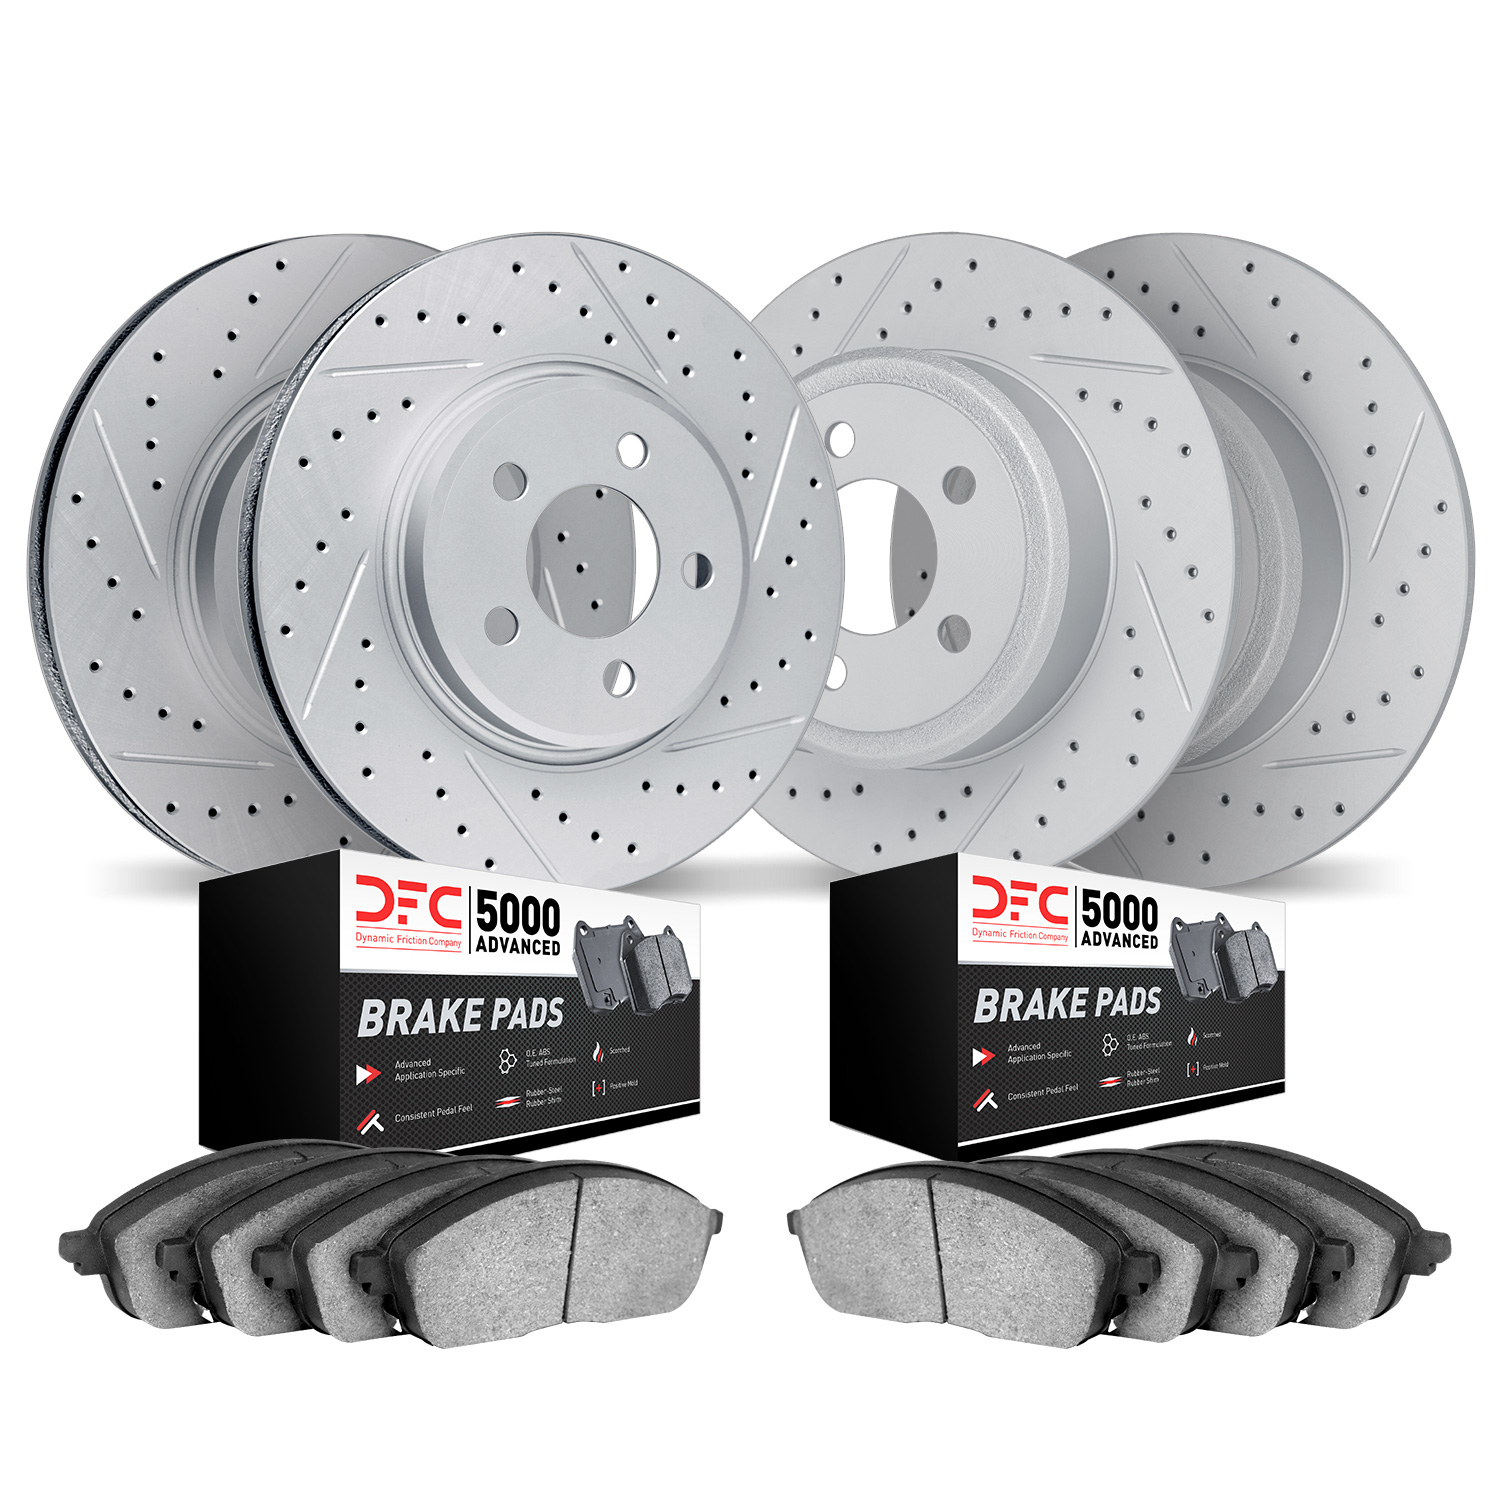 2504-67059 Geoperformance Drilled/Slotted Rotors w/5000 Advanced Brake Pads Kit, 2005-2008 Infiniti/Nissan, Position: Front and